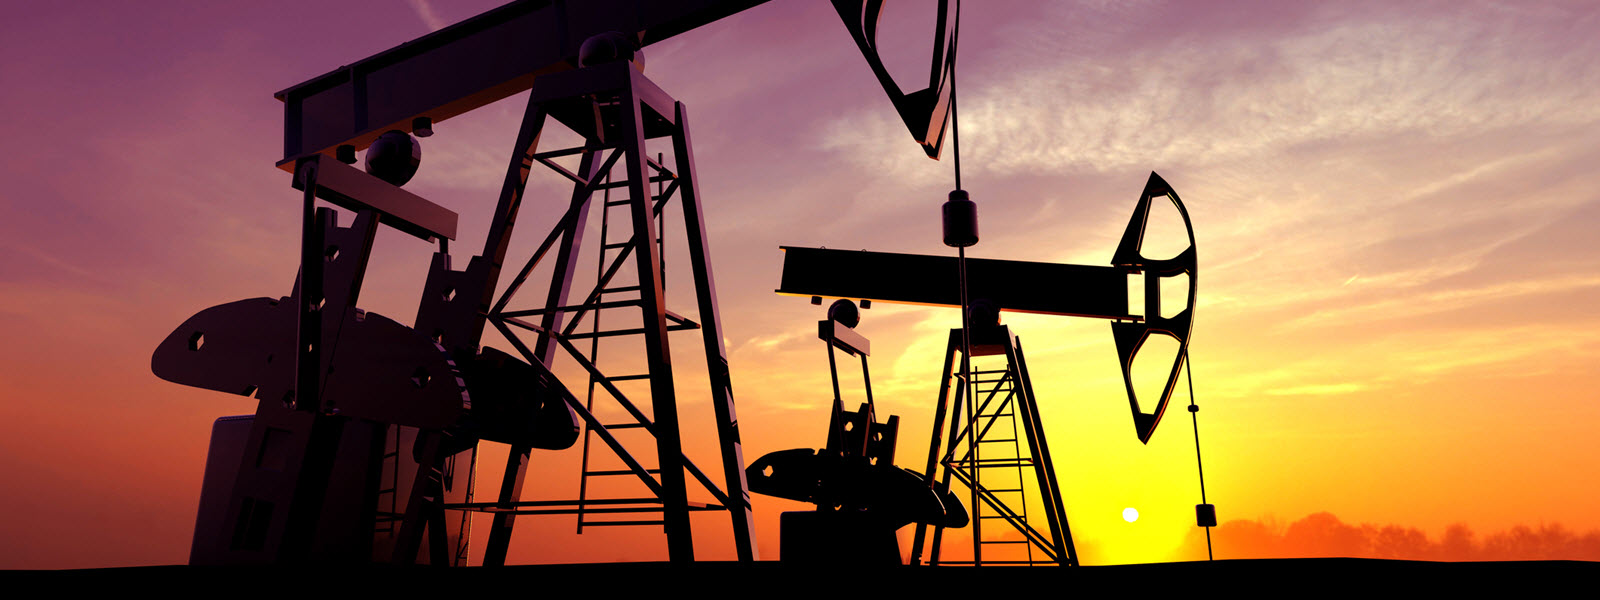 oil and gas industry post-Covid 19 and data management